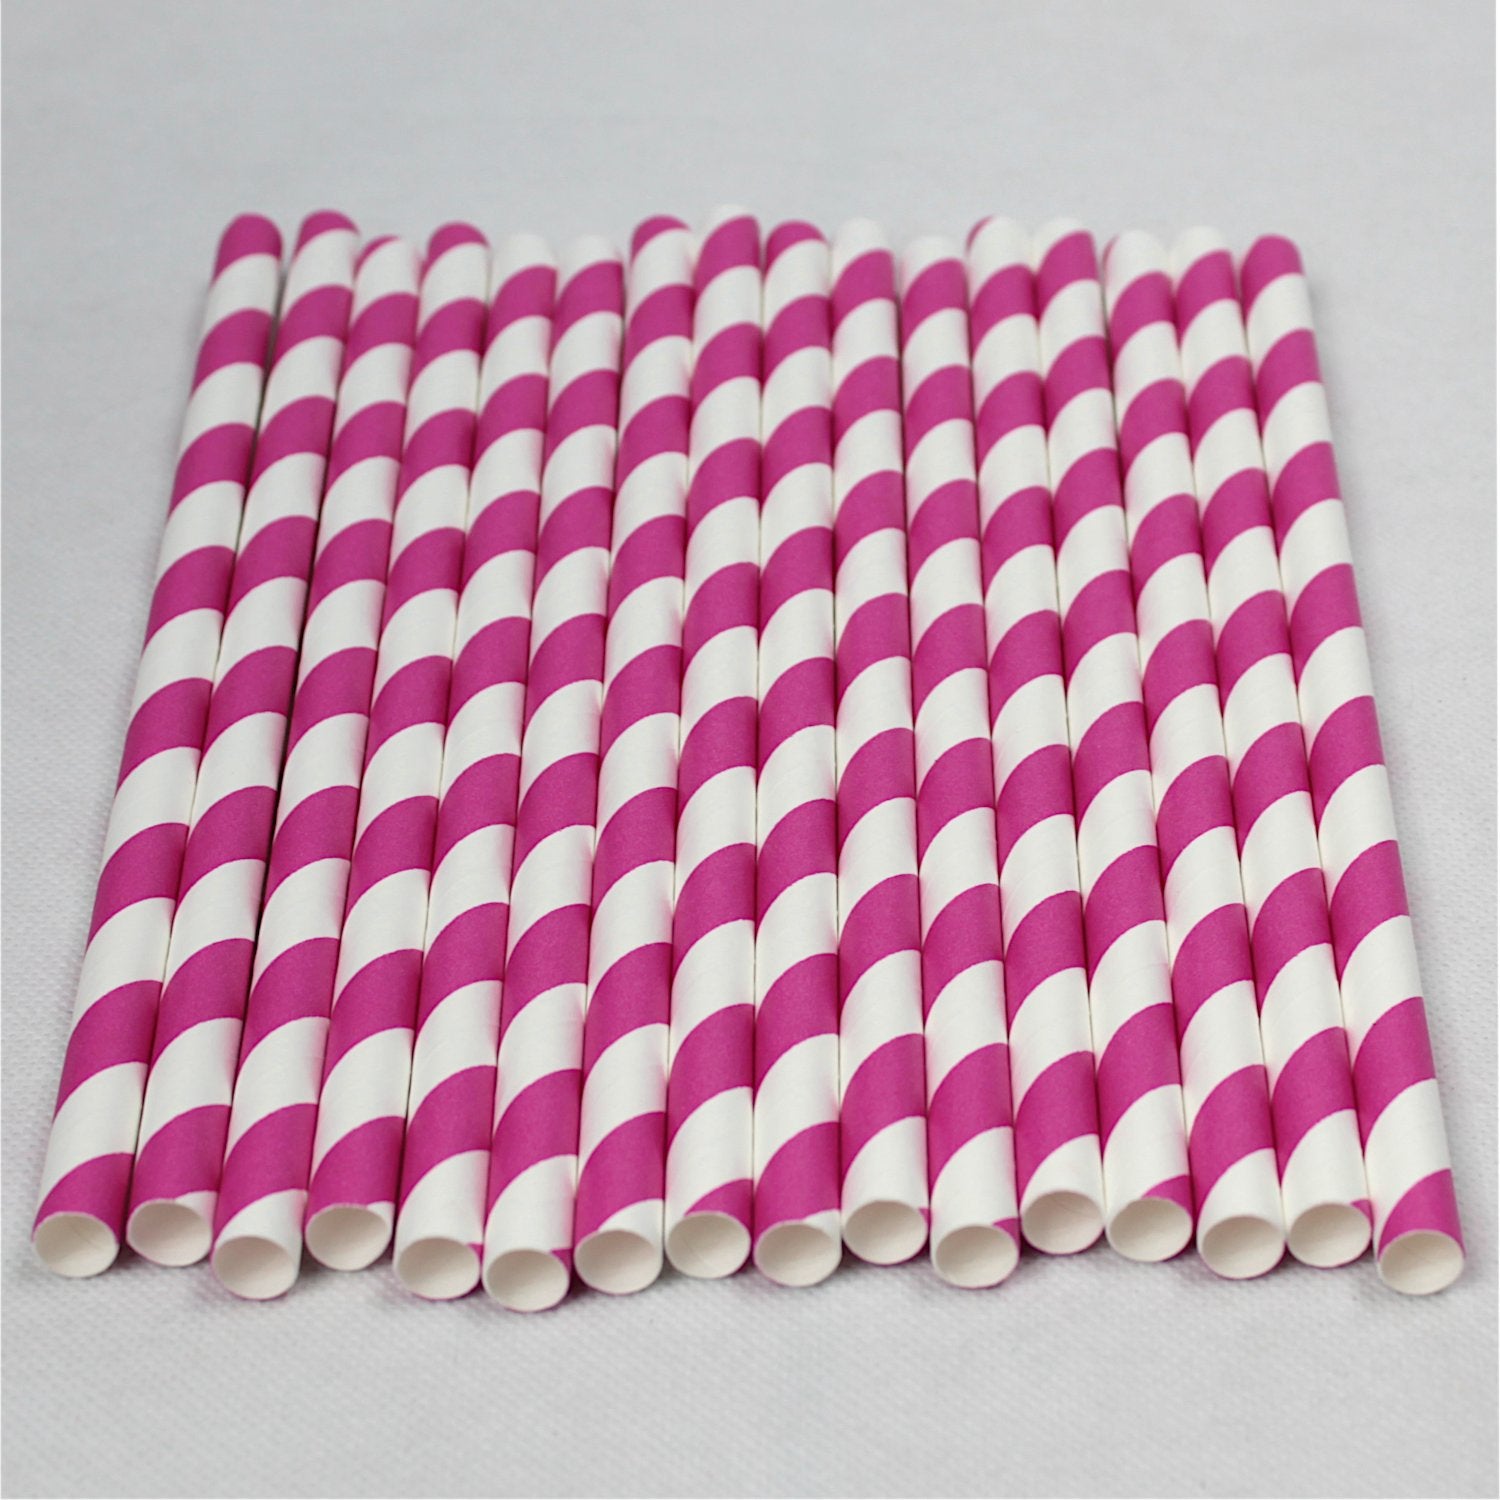 Pink & White Striped Paper Straws (10mm x 200mm) - Quality Drinking Straws for Smoothies and Milkshakes - Intrinsic Paper Straws